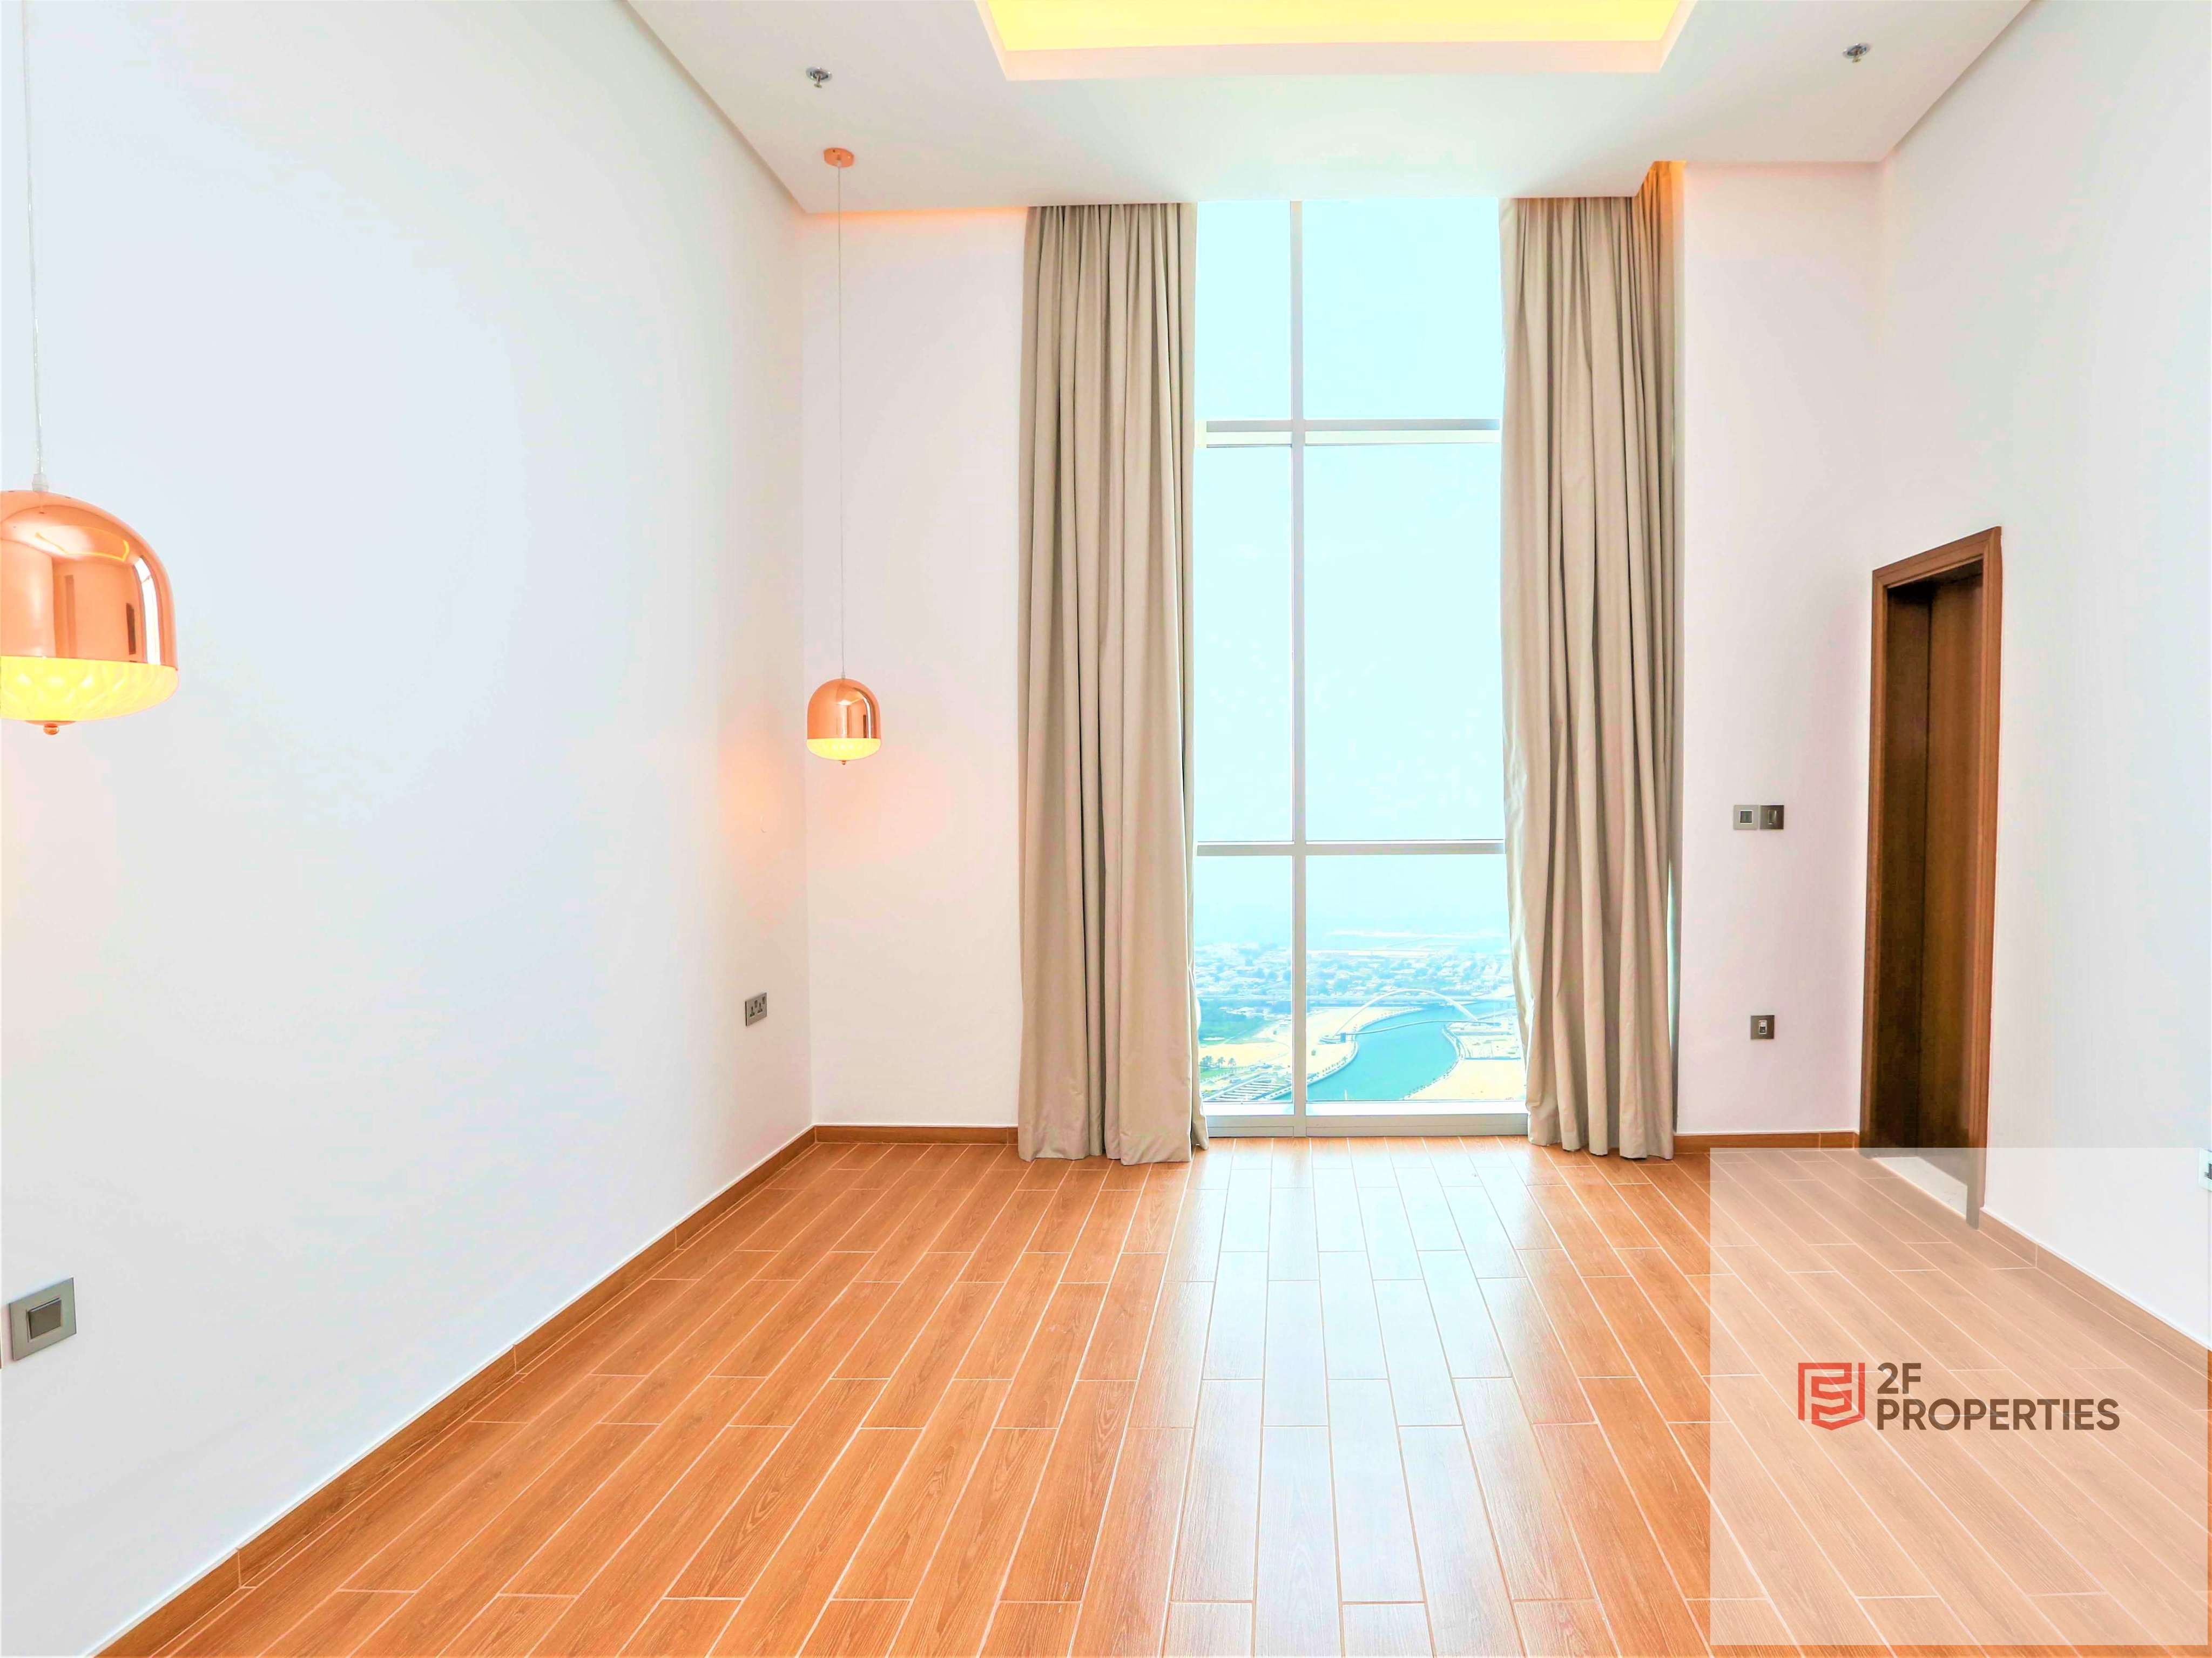 6 BR  Apartment For Sale in Meera